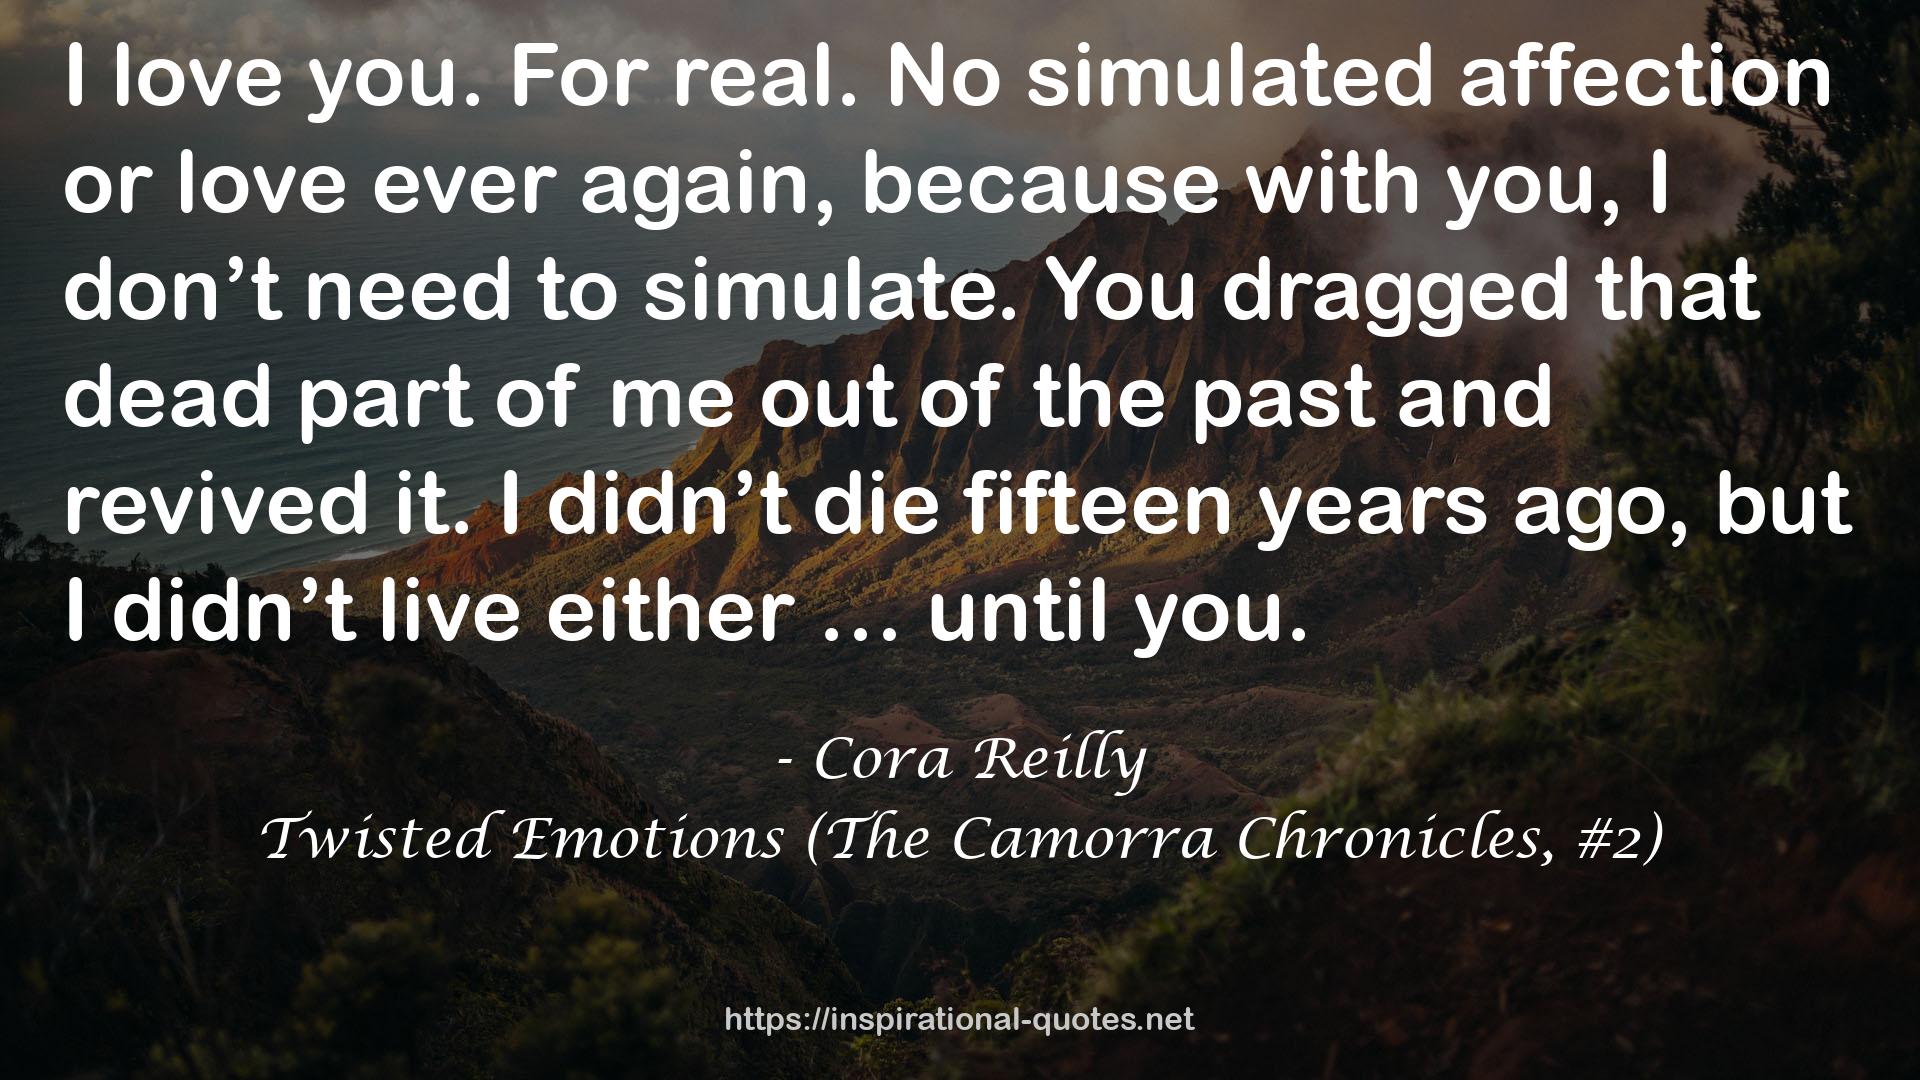 Twisted Emotions (The Camorra Chronicles, #2) QUOTES